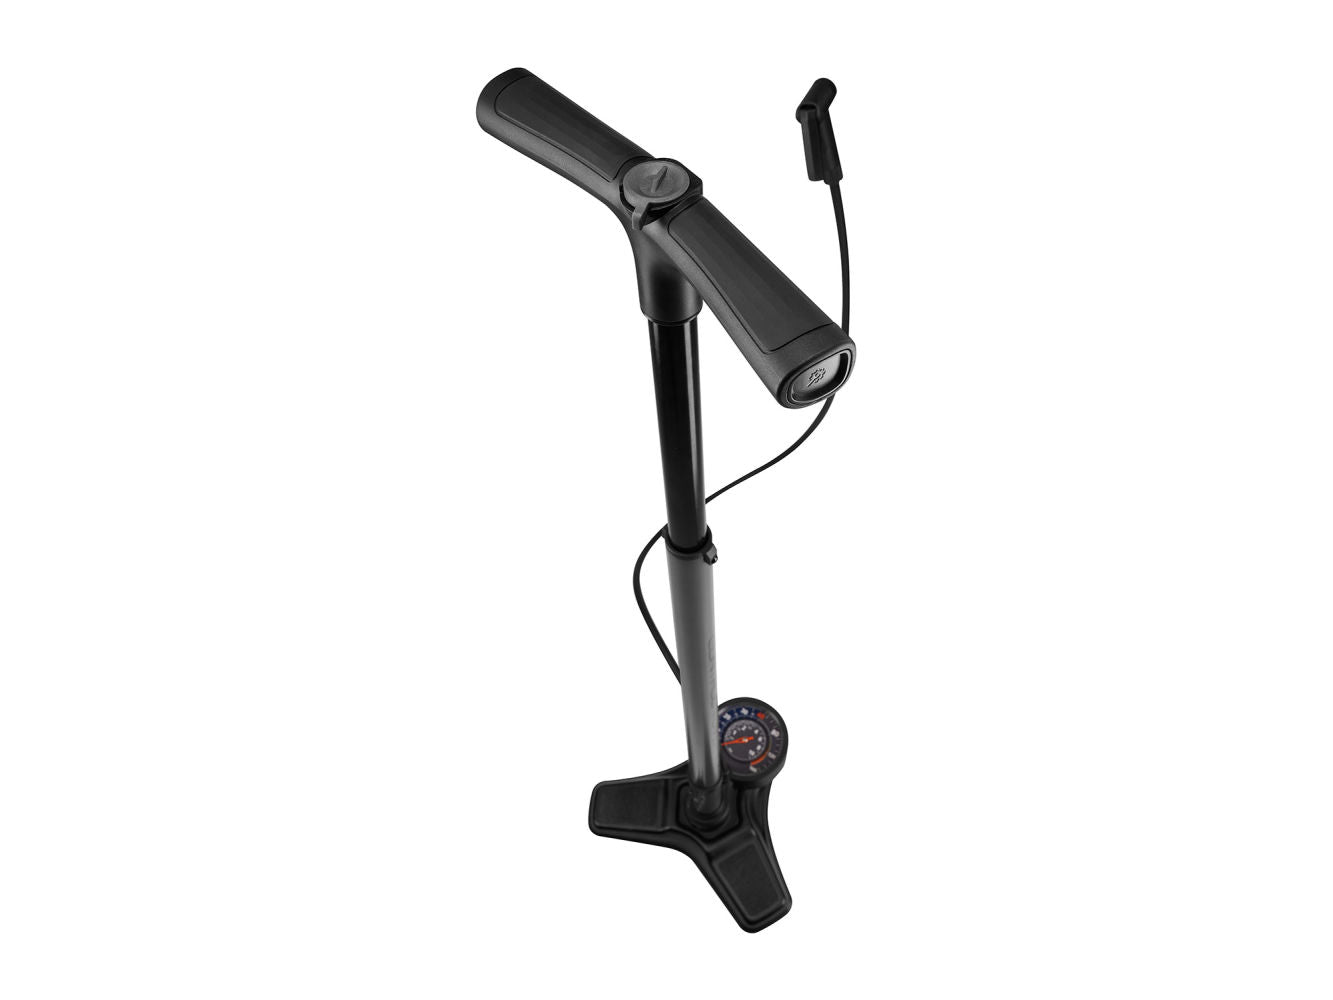 GIANT CONTROL TOWER PRO 2-STAGE FLOOR PUMP